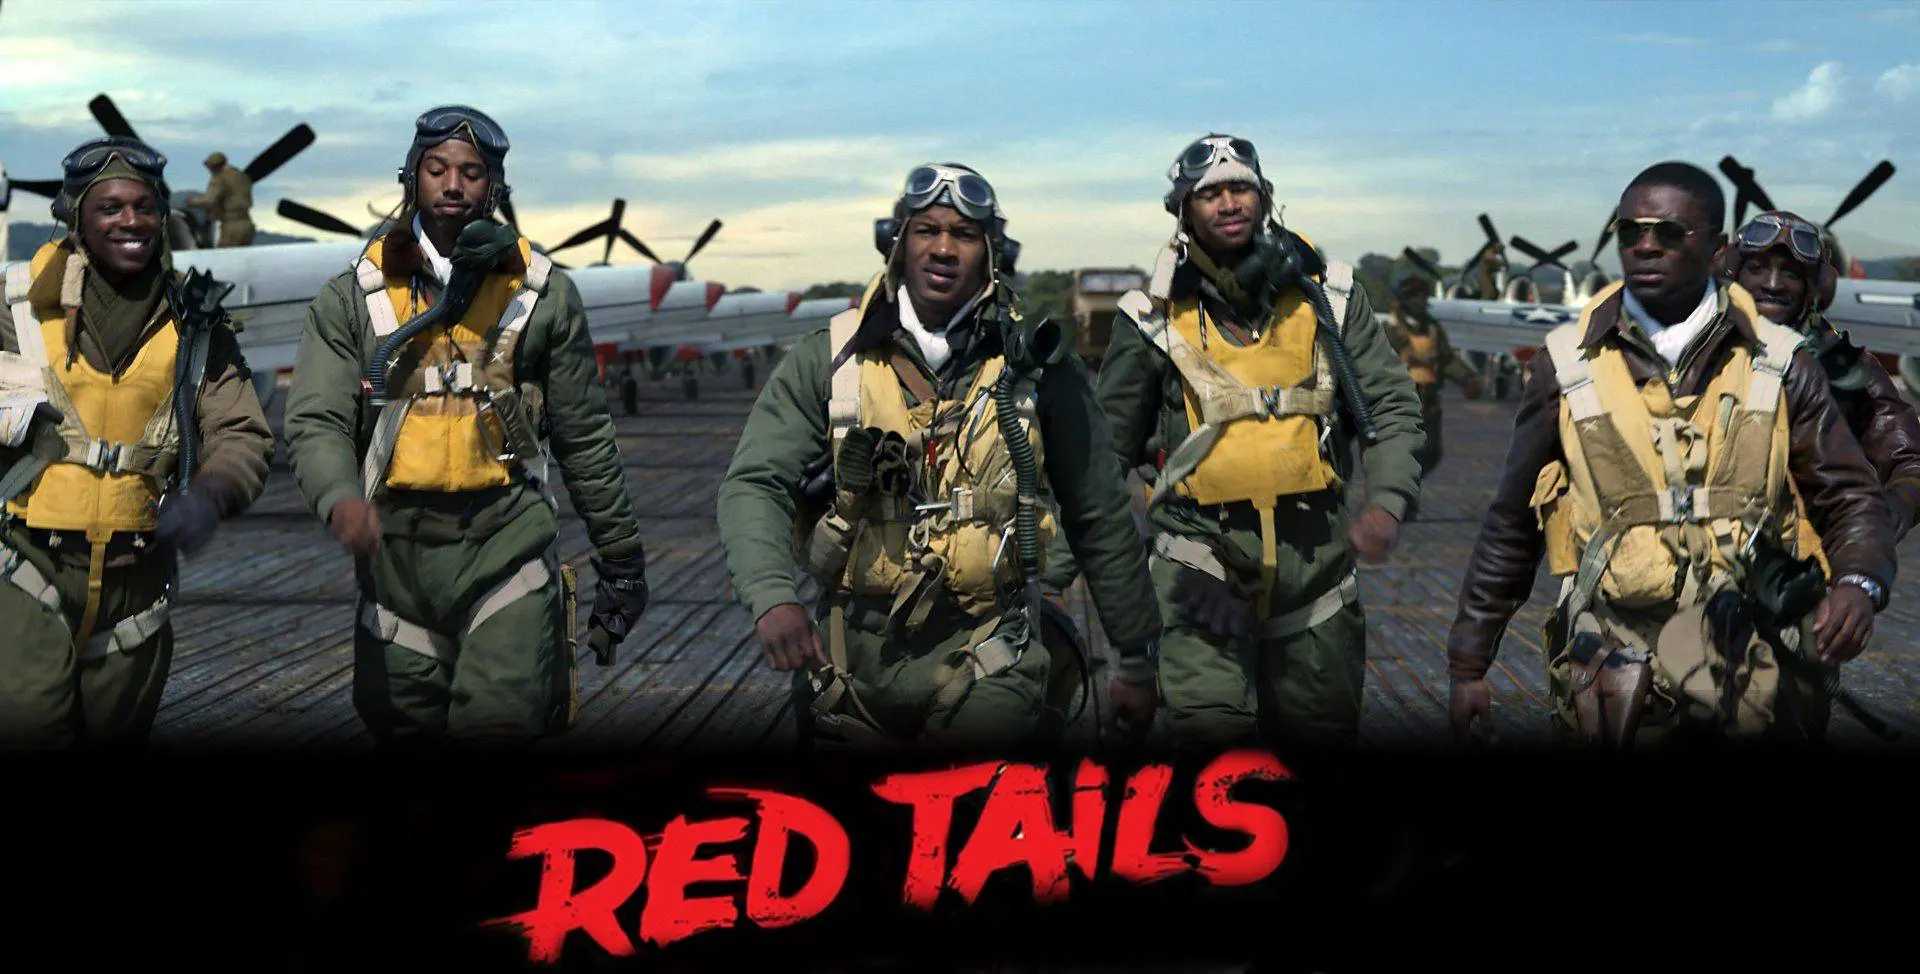 Movie Red Tails wallpaper 2 | Background Image